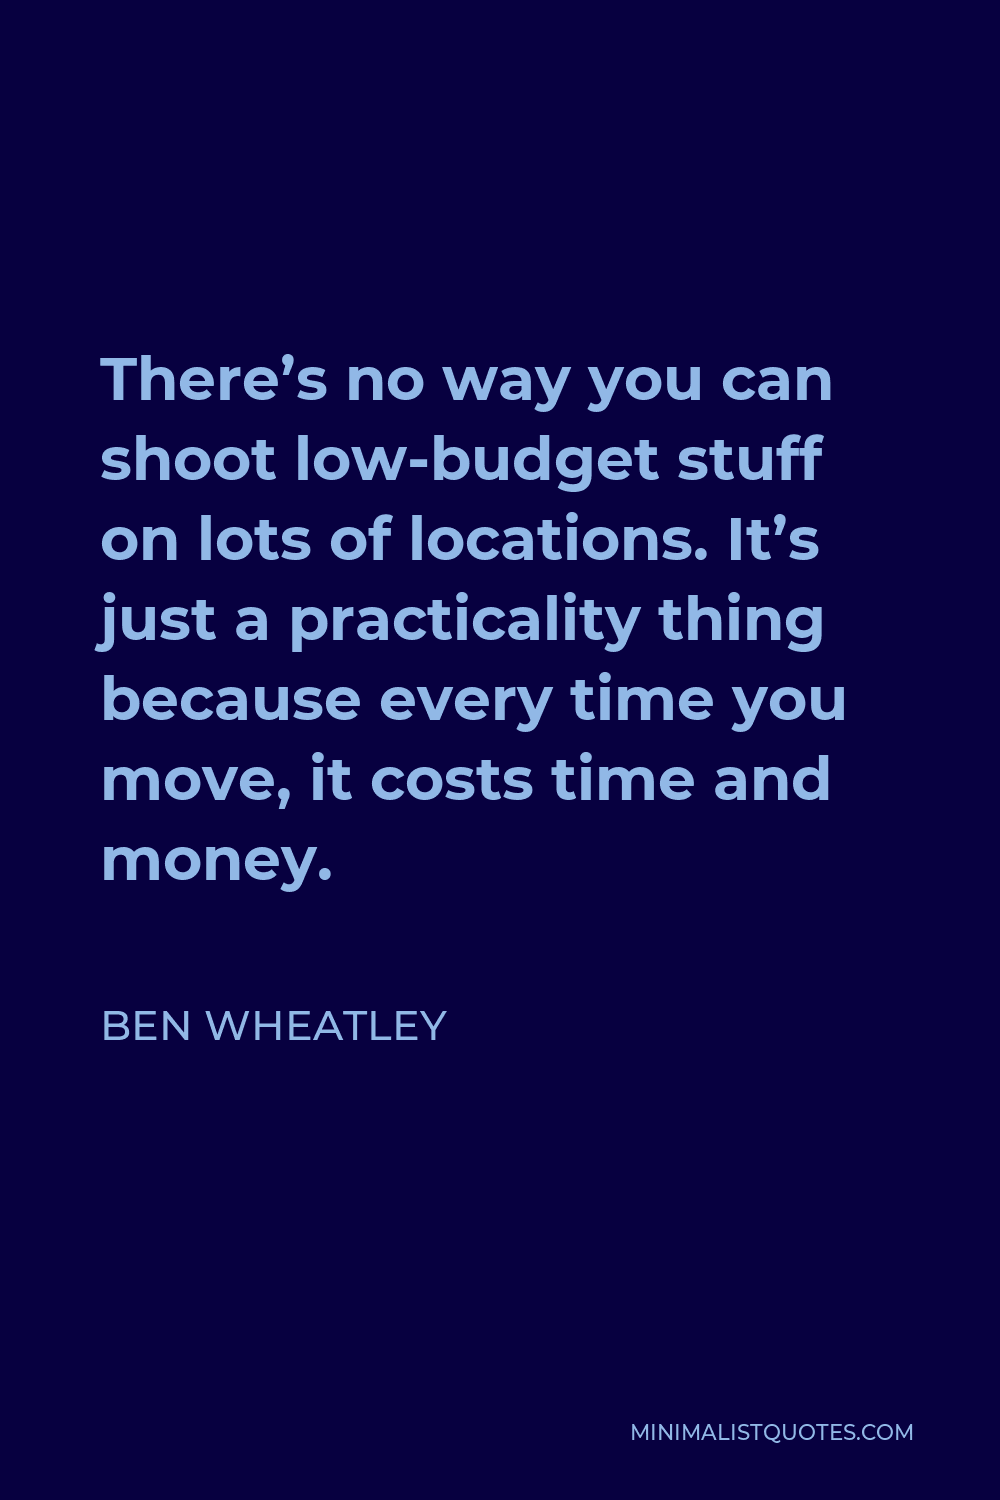 Ben Wheatley Quote - There’s no way you can shoot low-budget stuff on lots of locations. It’s just a practicality thing because every time you move, it costs time and money.